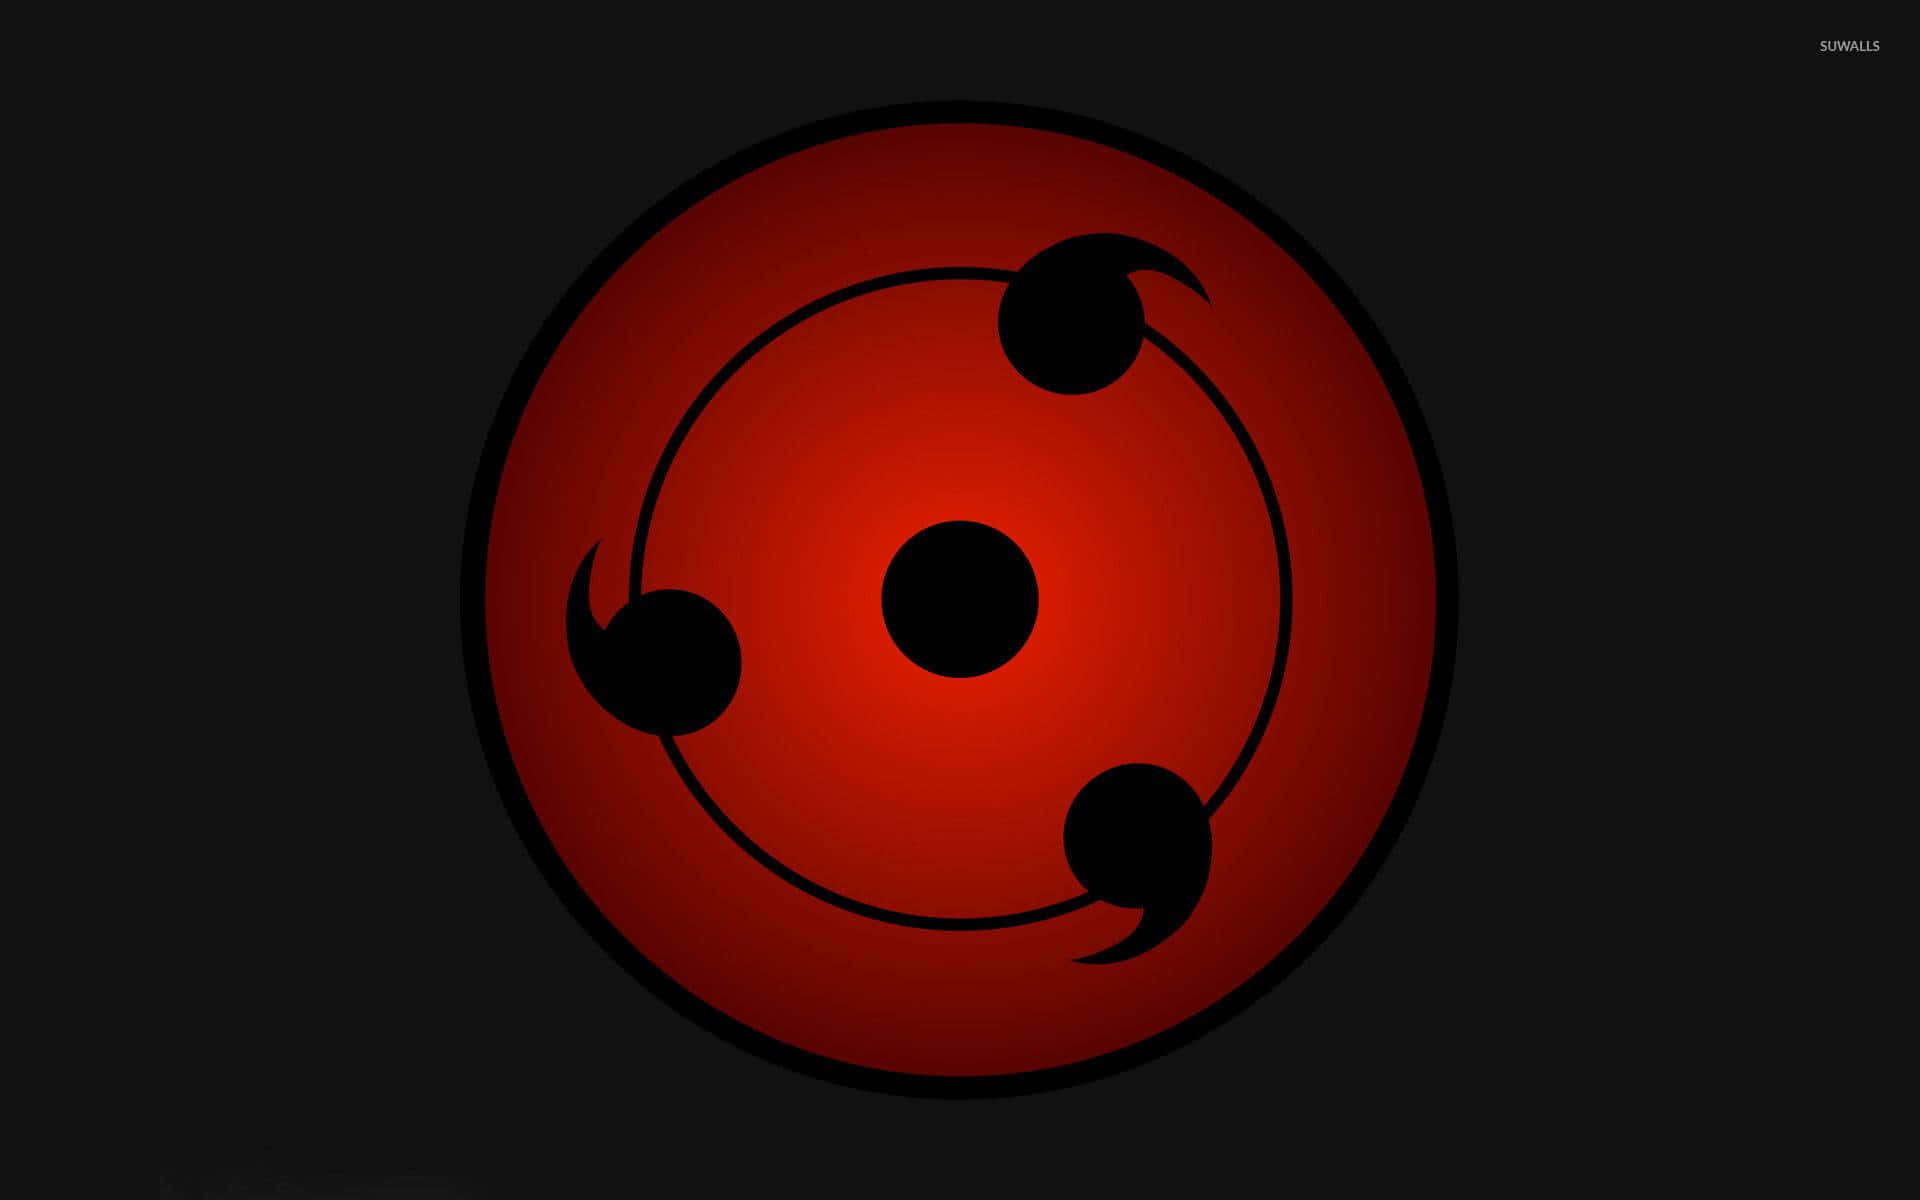 A Red Circle With Black Circles On It Wallpaper